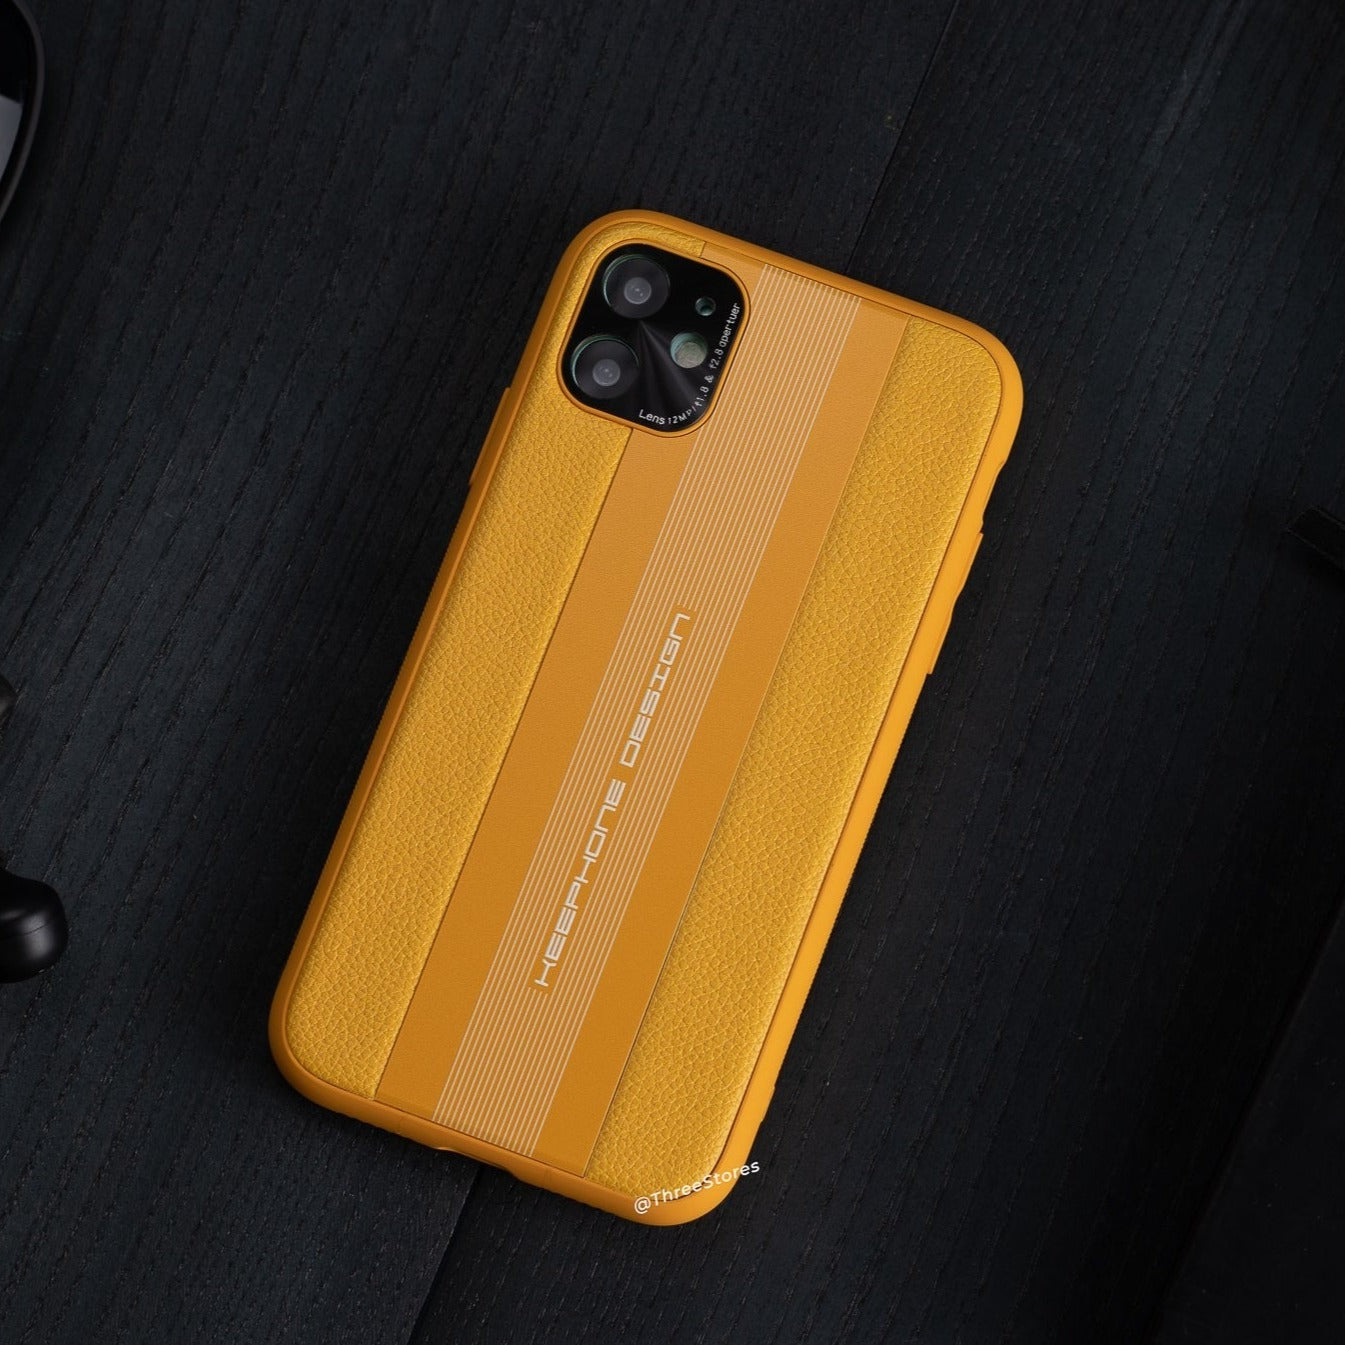 KeepHone Posche Camera Protection Case iPhone 11